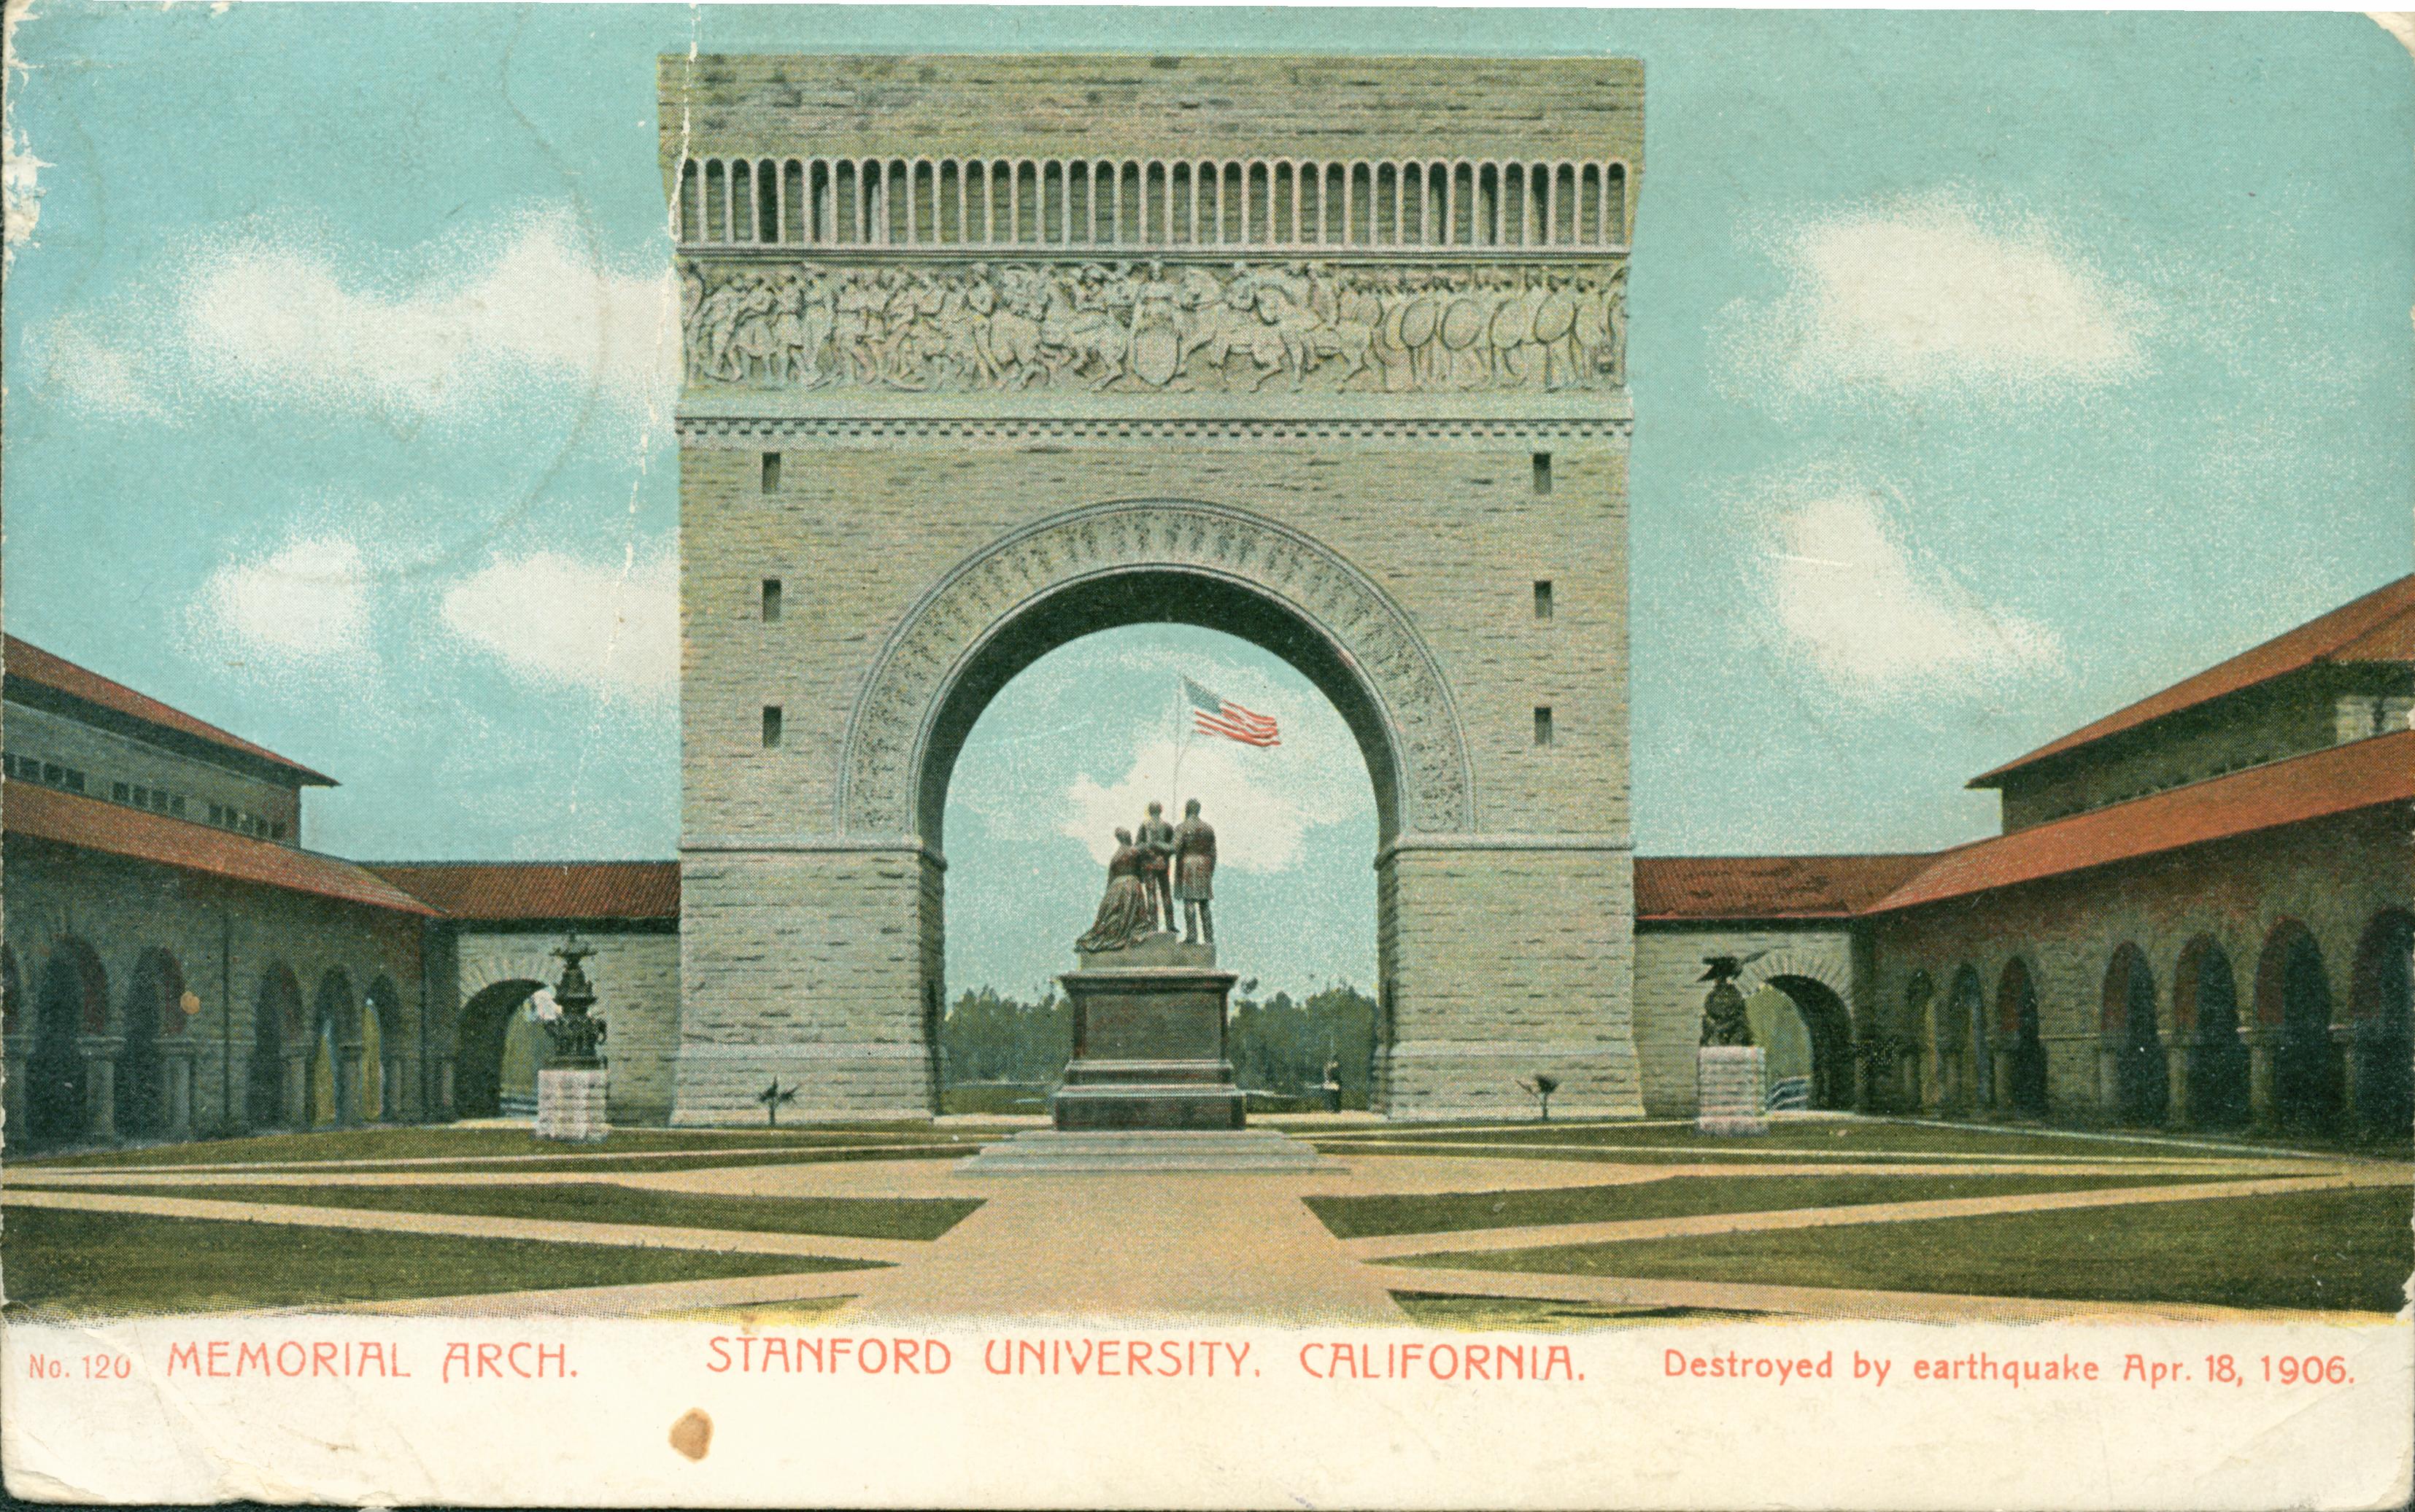 View of Memorial Arch in the Stanford University Quad, statue of Leland Stanford Jr., Jane Stanford & Leland Stanford, Sr. in center of quad